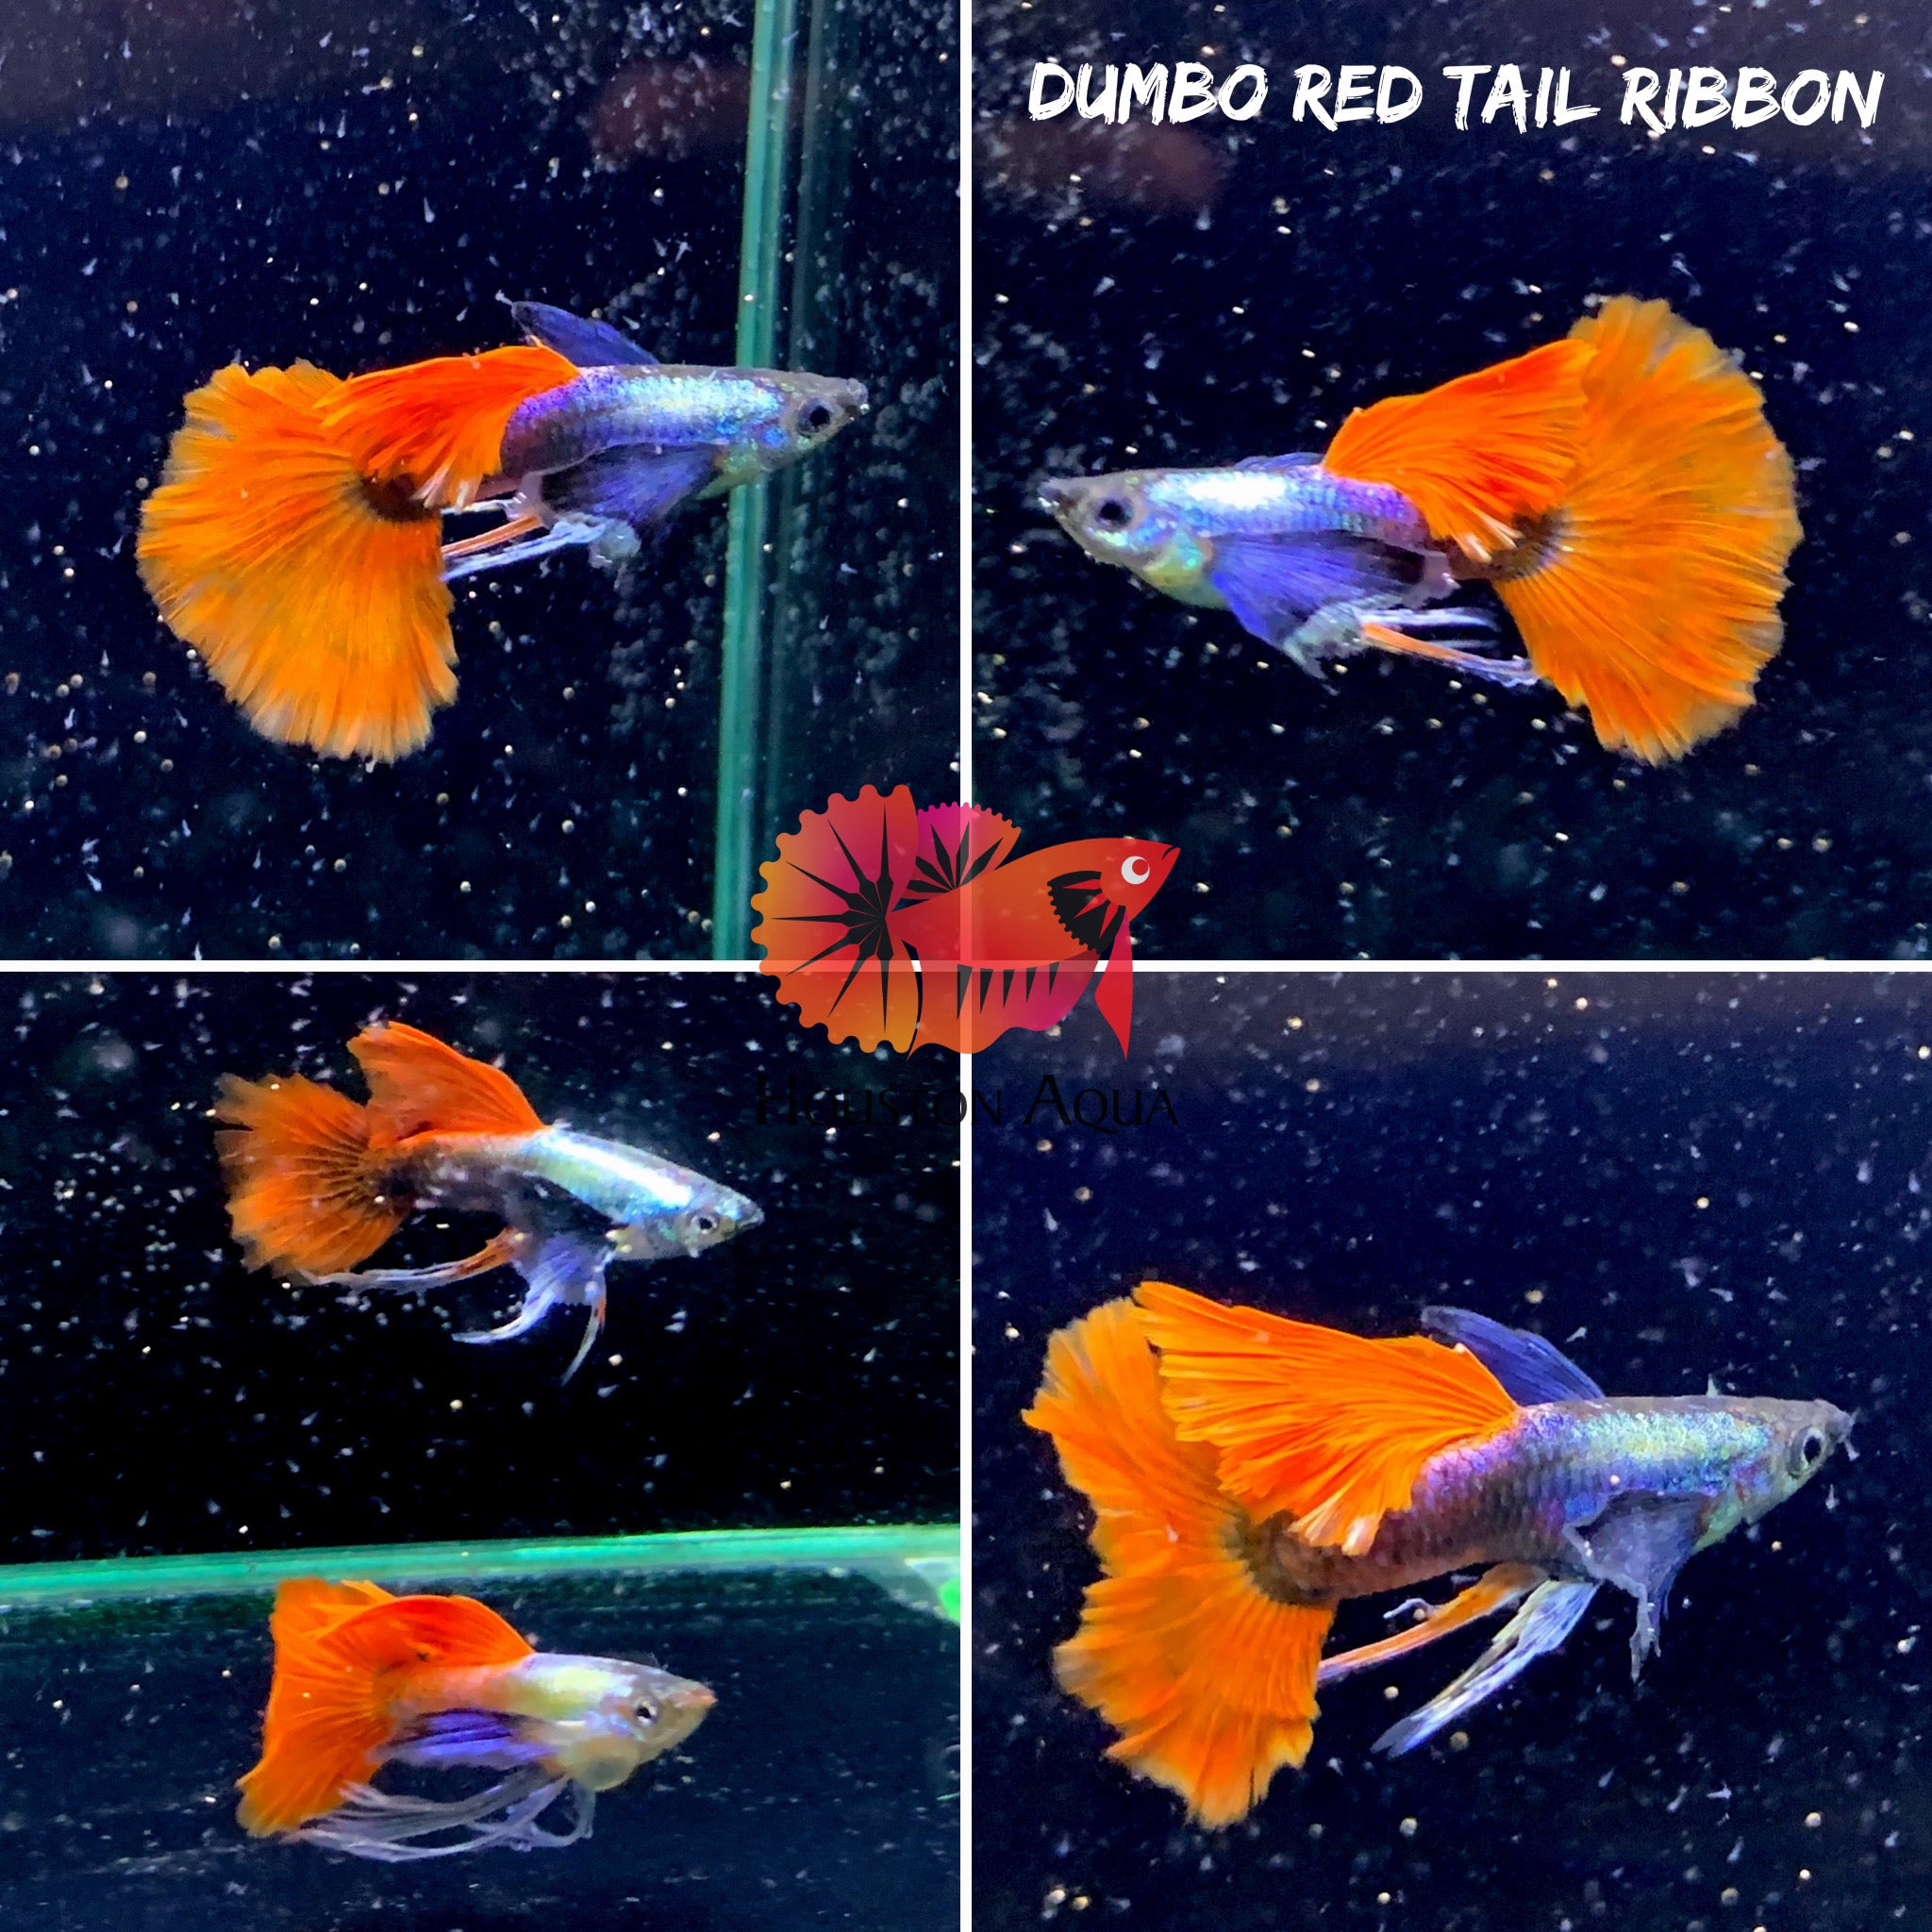 Dumbo Red Tail